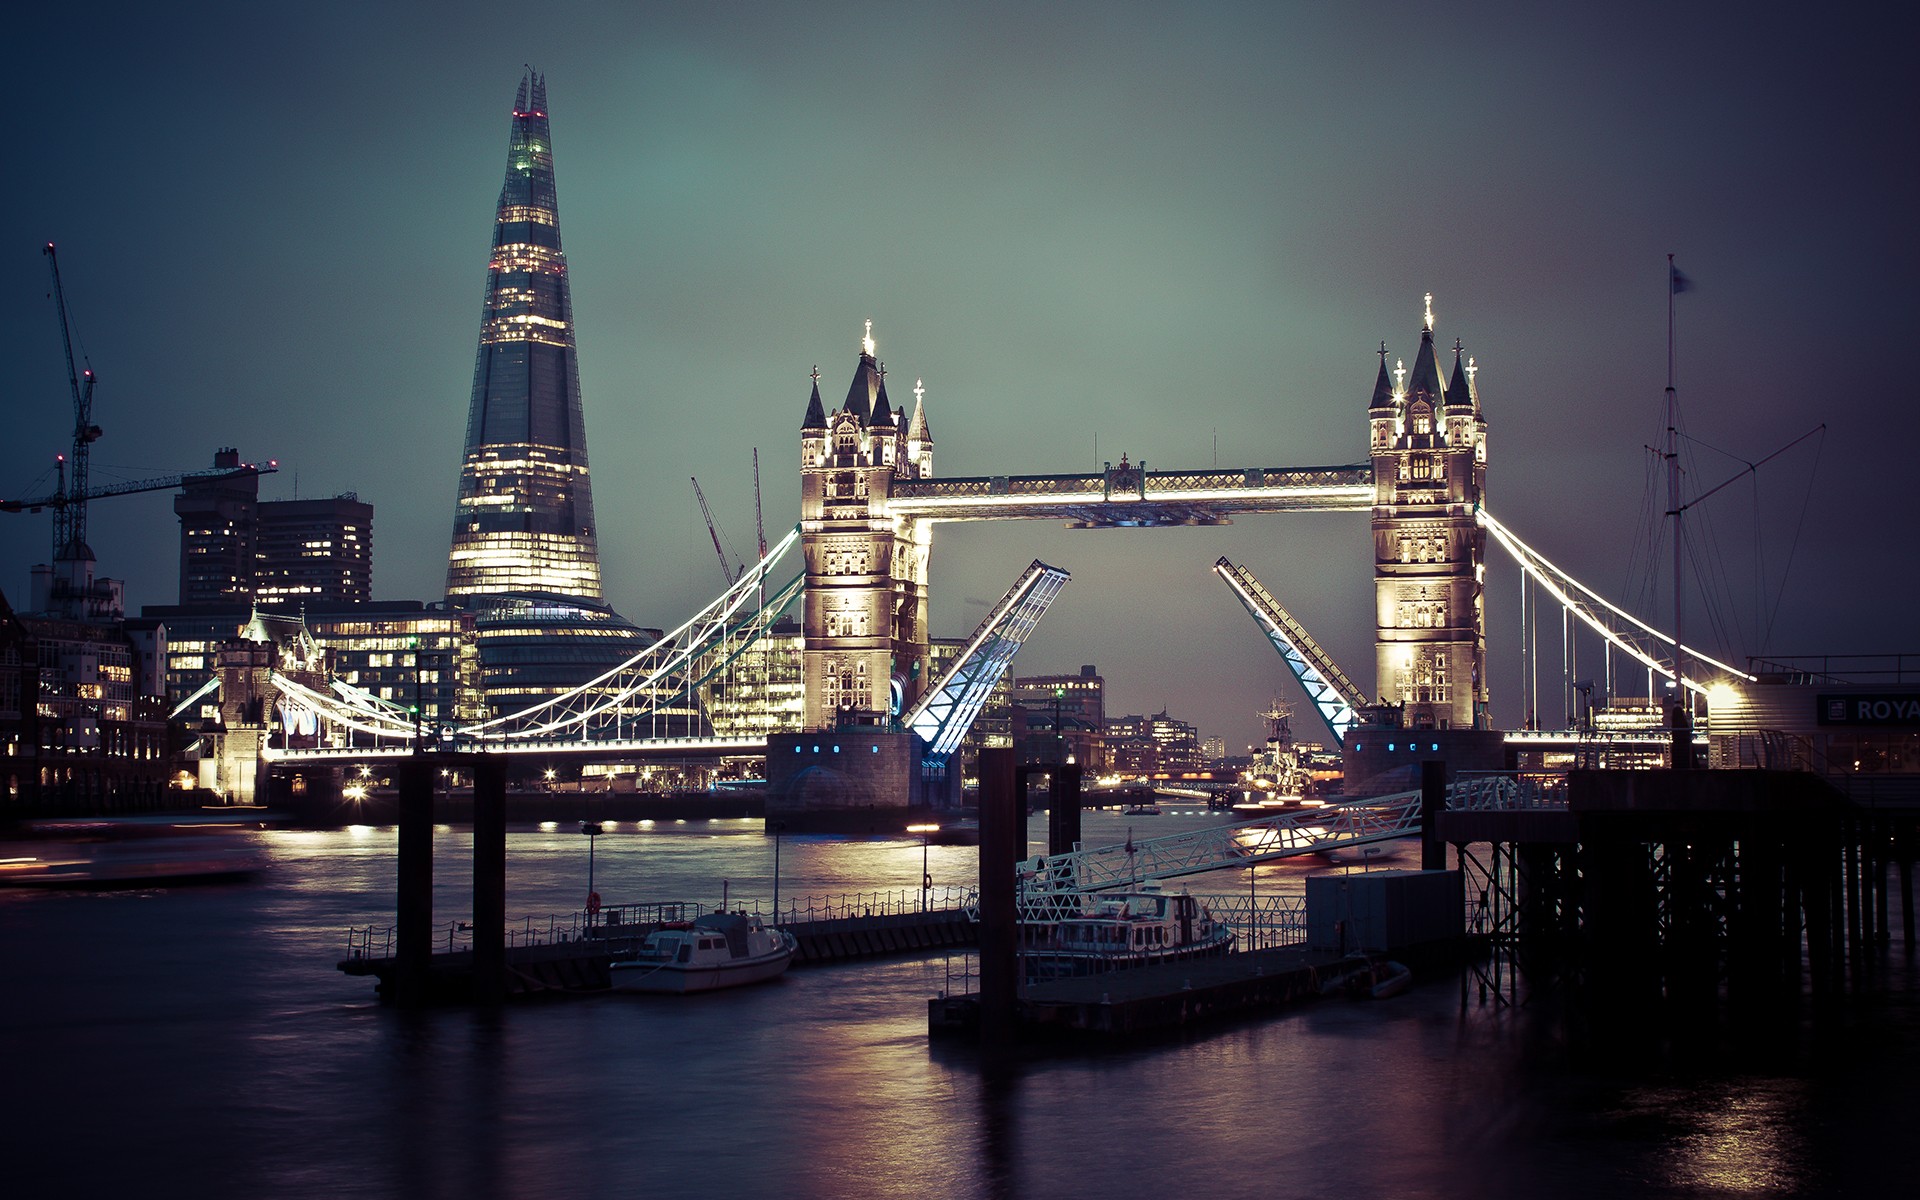 light, Water, Cityscapes, Dawn, Night, England, Ships, London, Bridges, Downtown, Skyscrapers, Metropolis, City, Lights, Tower, Bridge, Rivers, Skyscapes Wallpaper